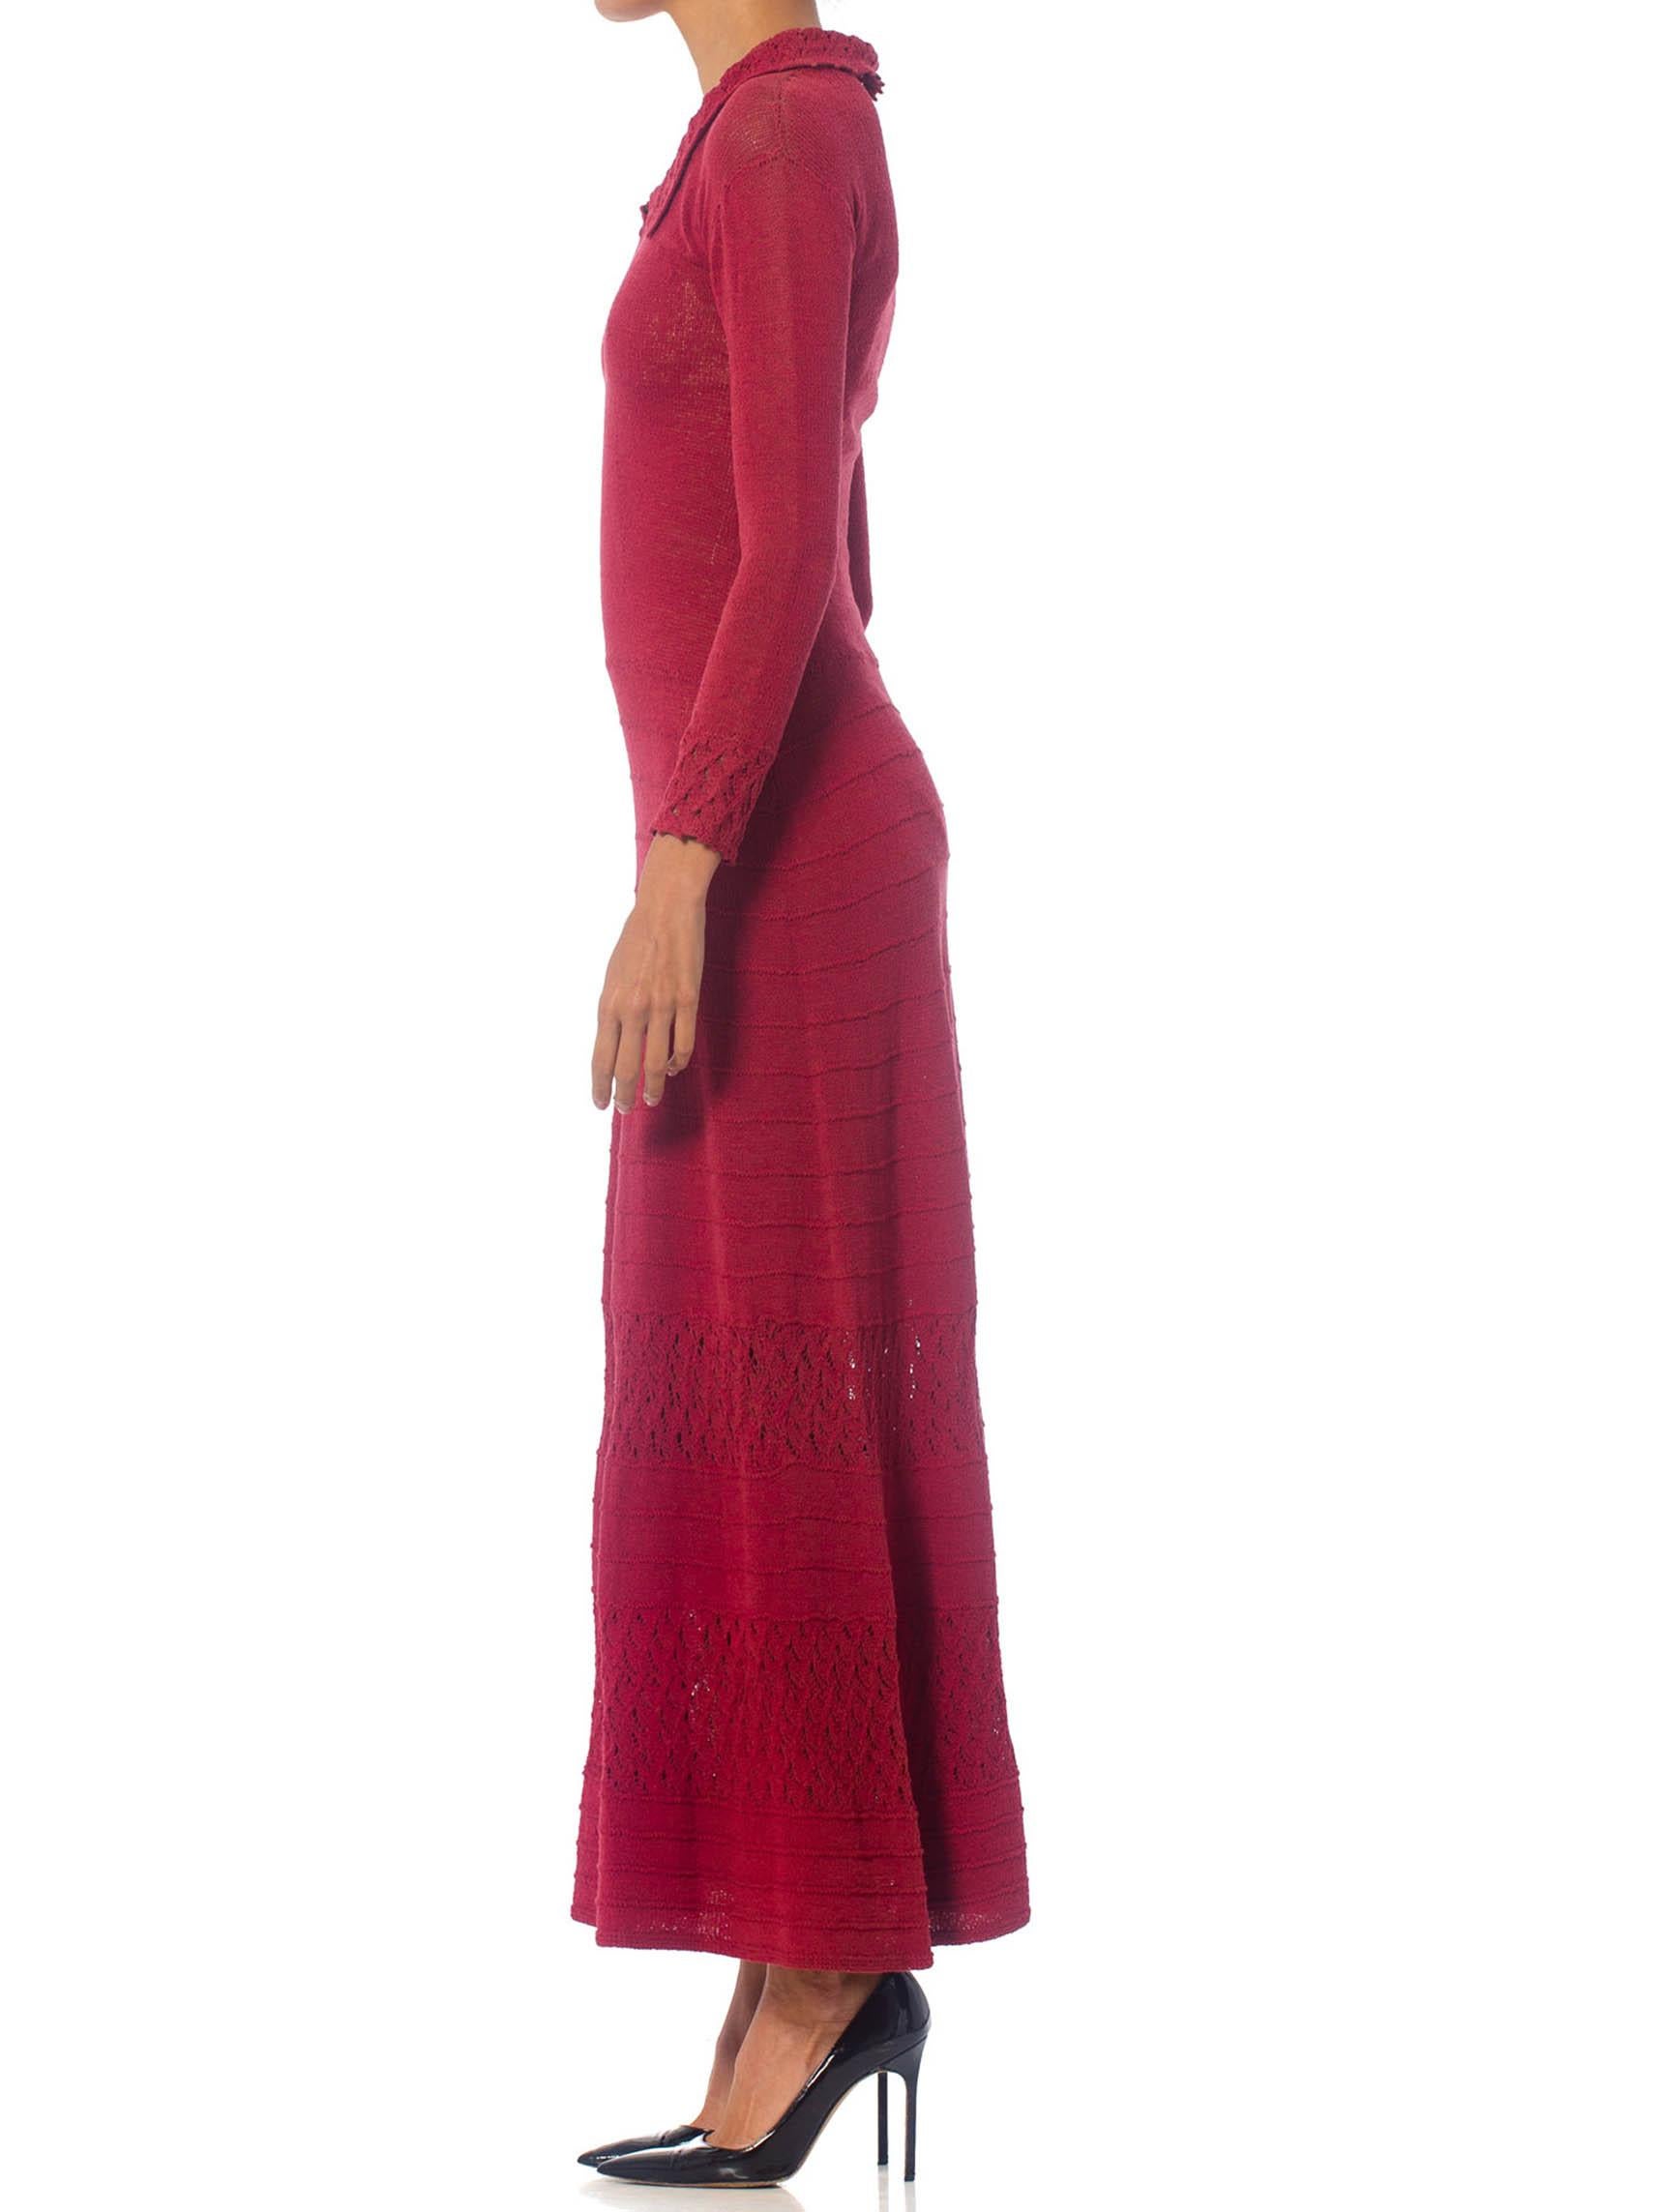 1930S Cranberry Red Rare Rayon Blend Knit Maxi Dress With Sleeves For Sale 1